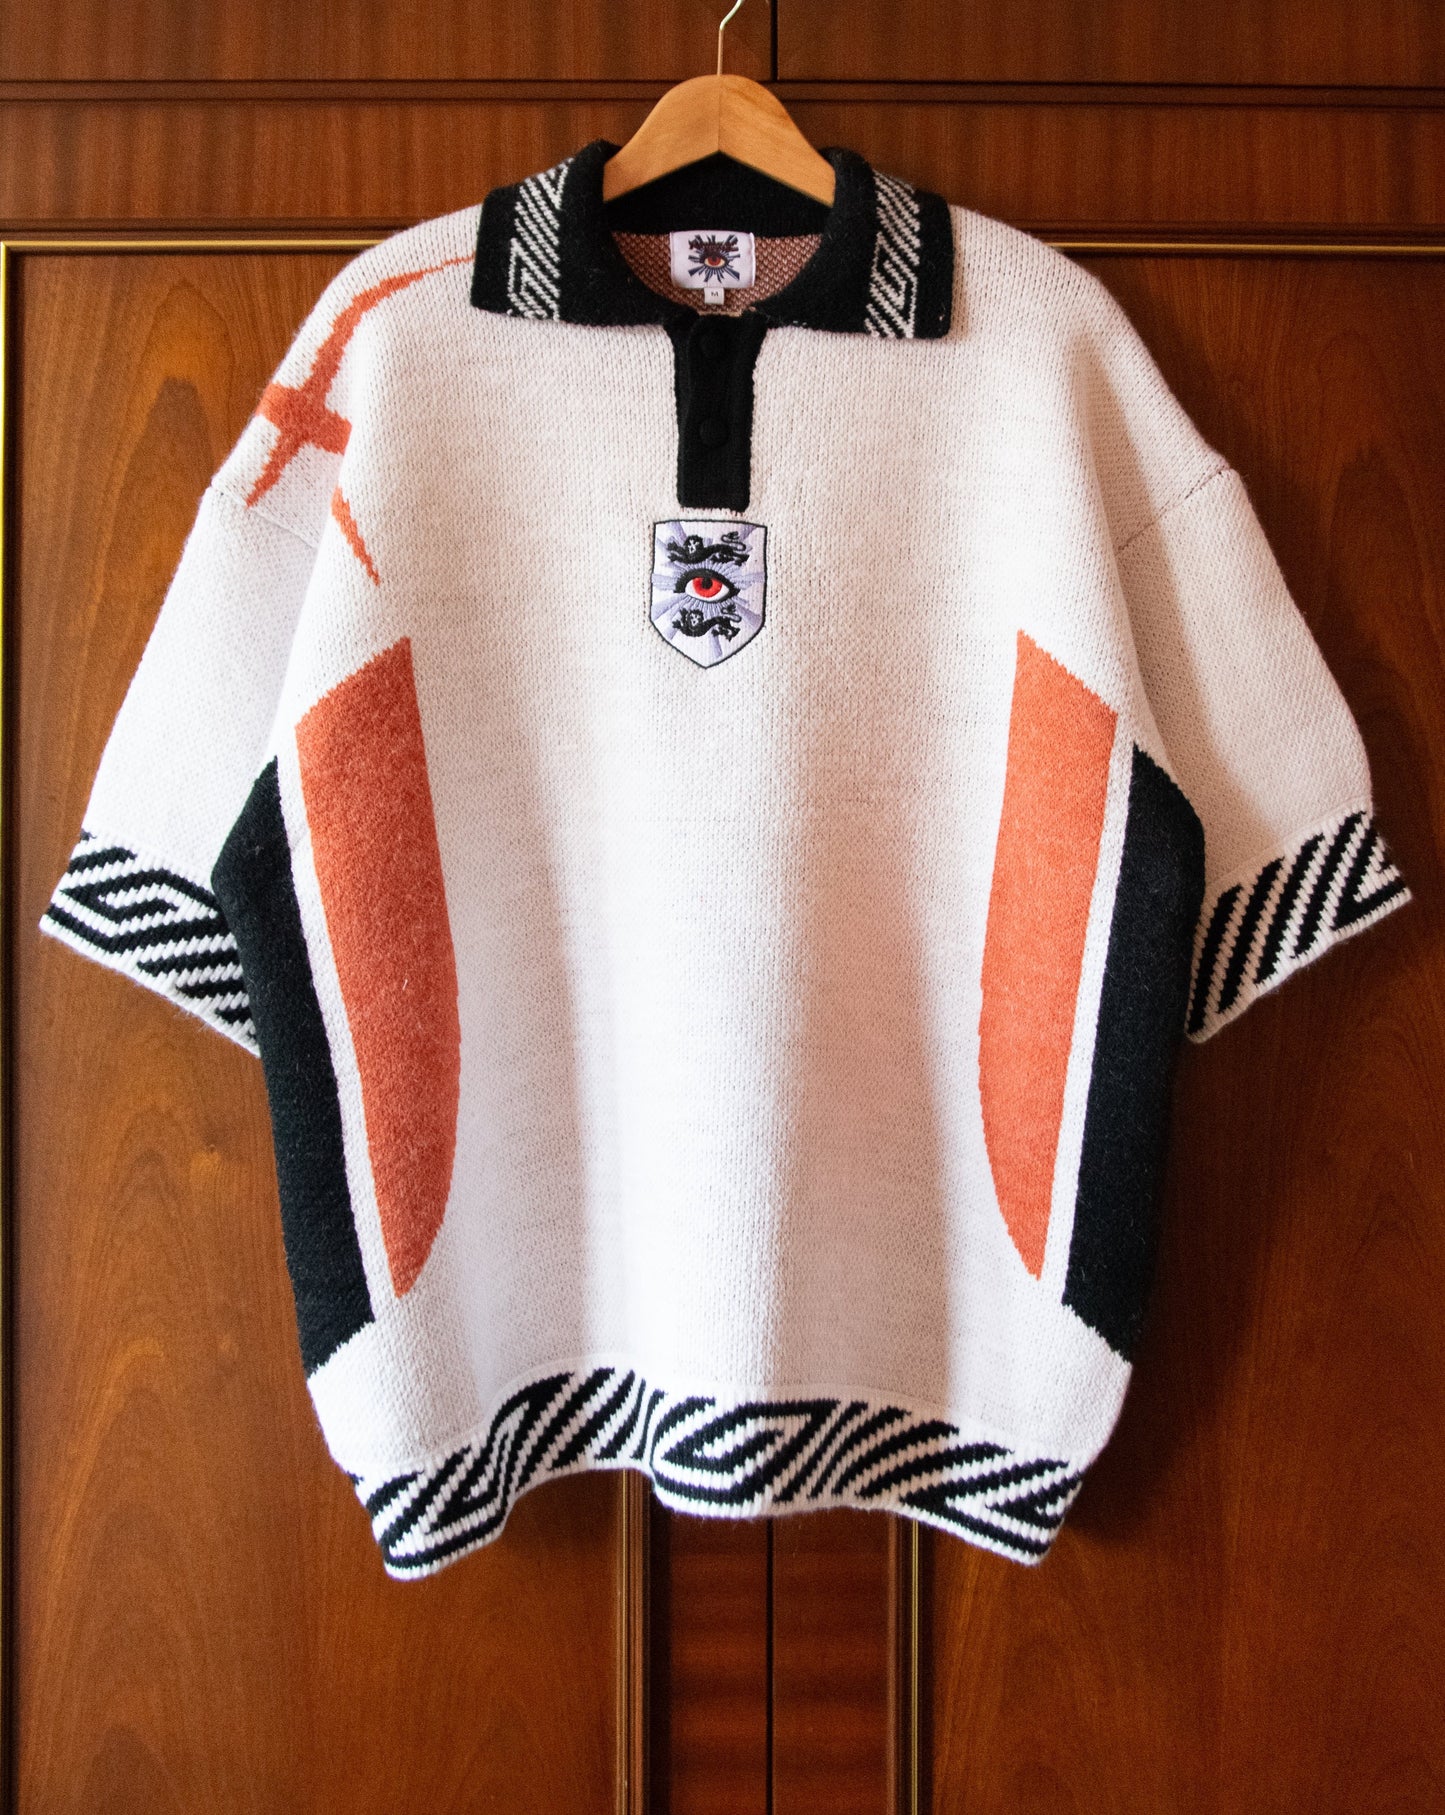 KNITTED FOOTBALL TOP - ENGLAND